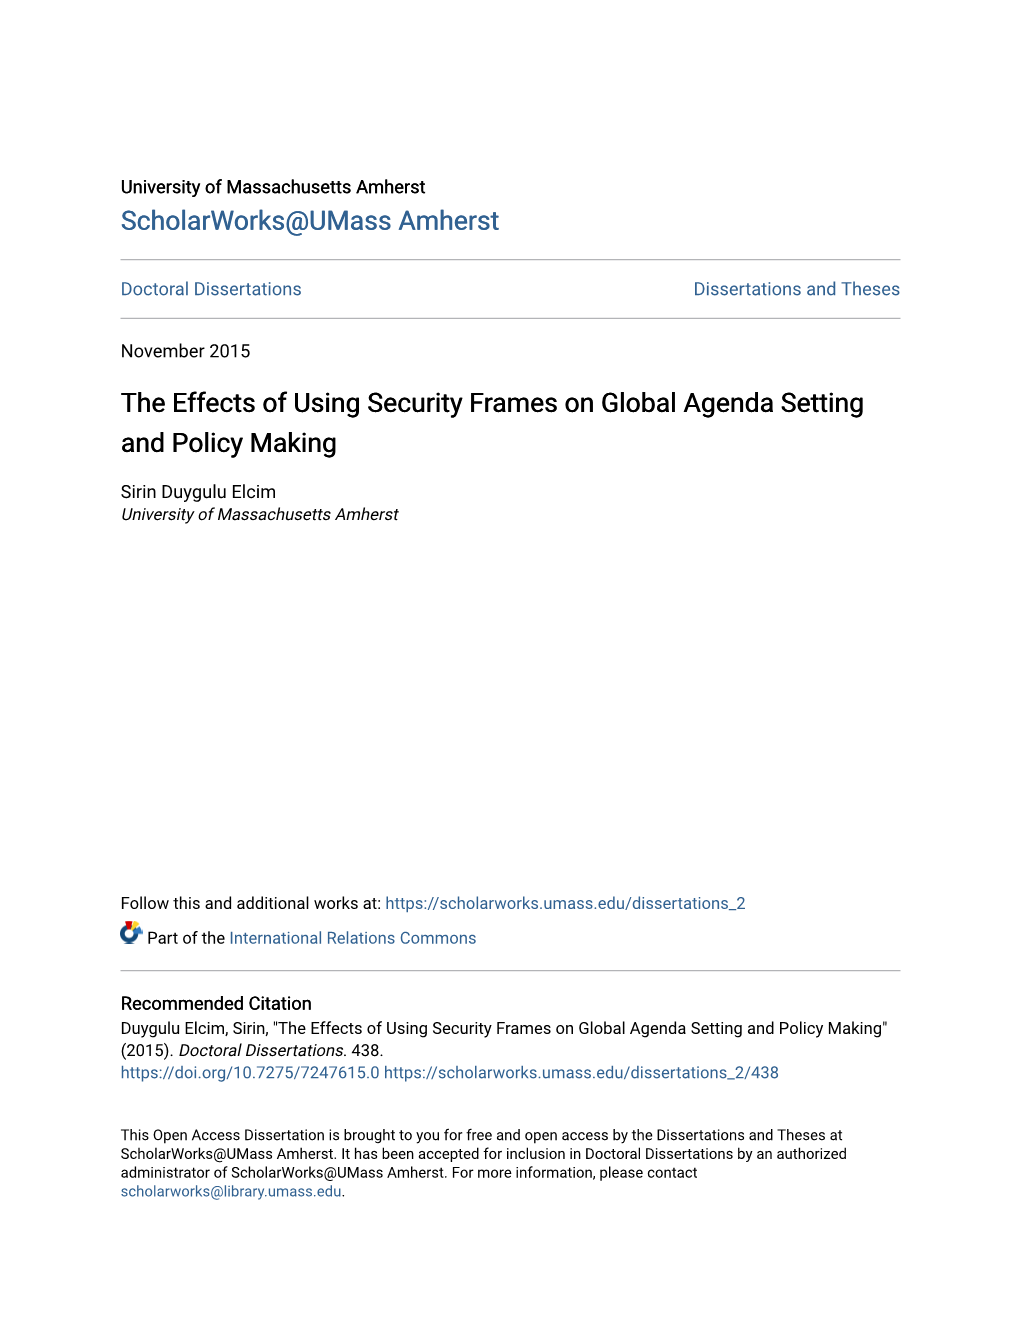 The Effects of Using Security Frames on Global Agenda Setting and Policy Making